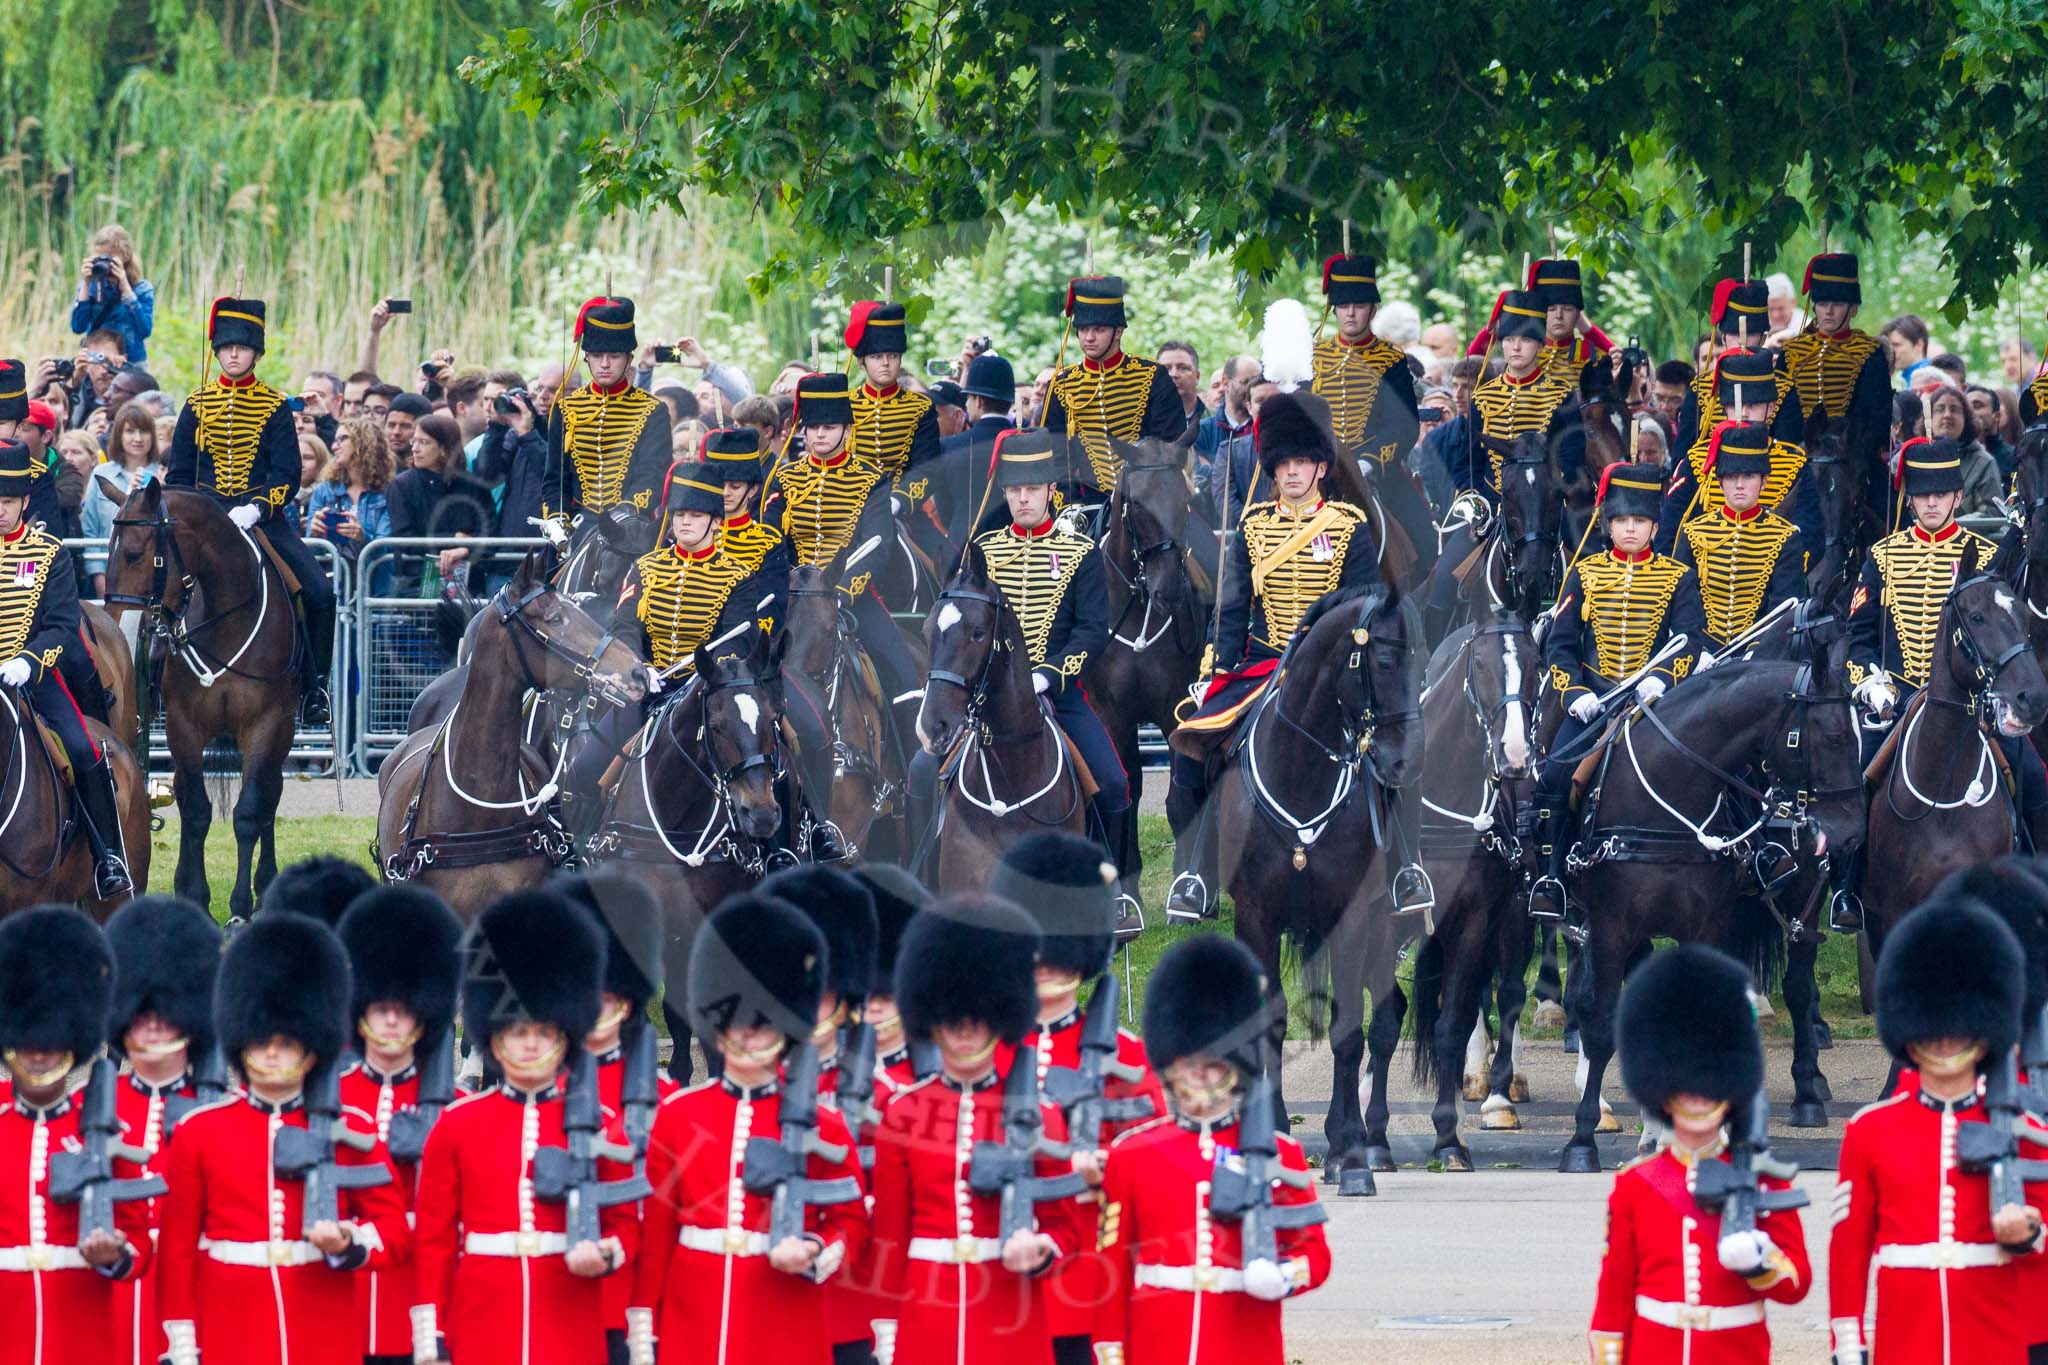 Trooping the Colour 2015. Image #147, 13 June 2015 10:39 Horse Guards Parade, London, UK